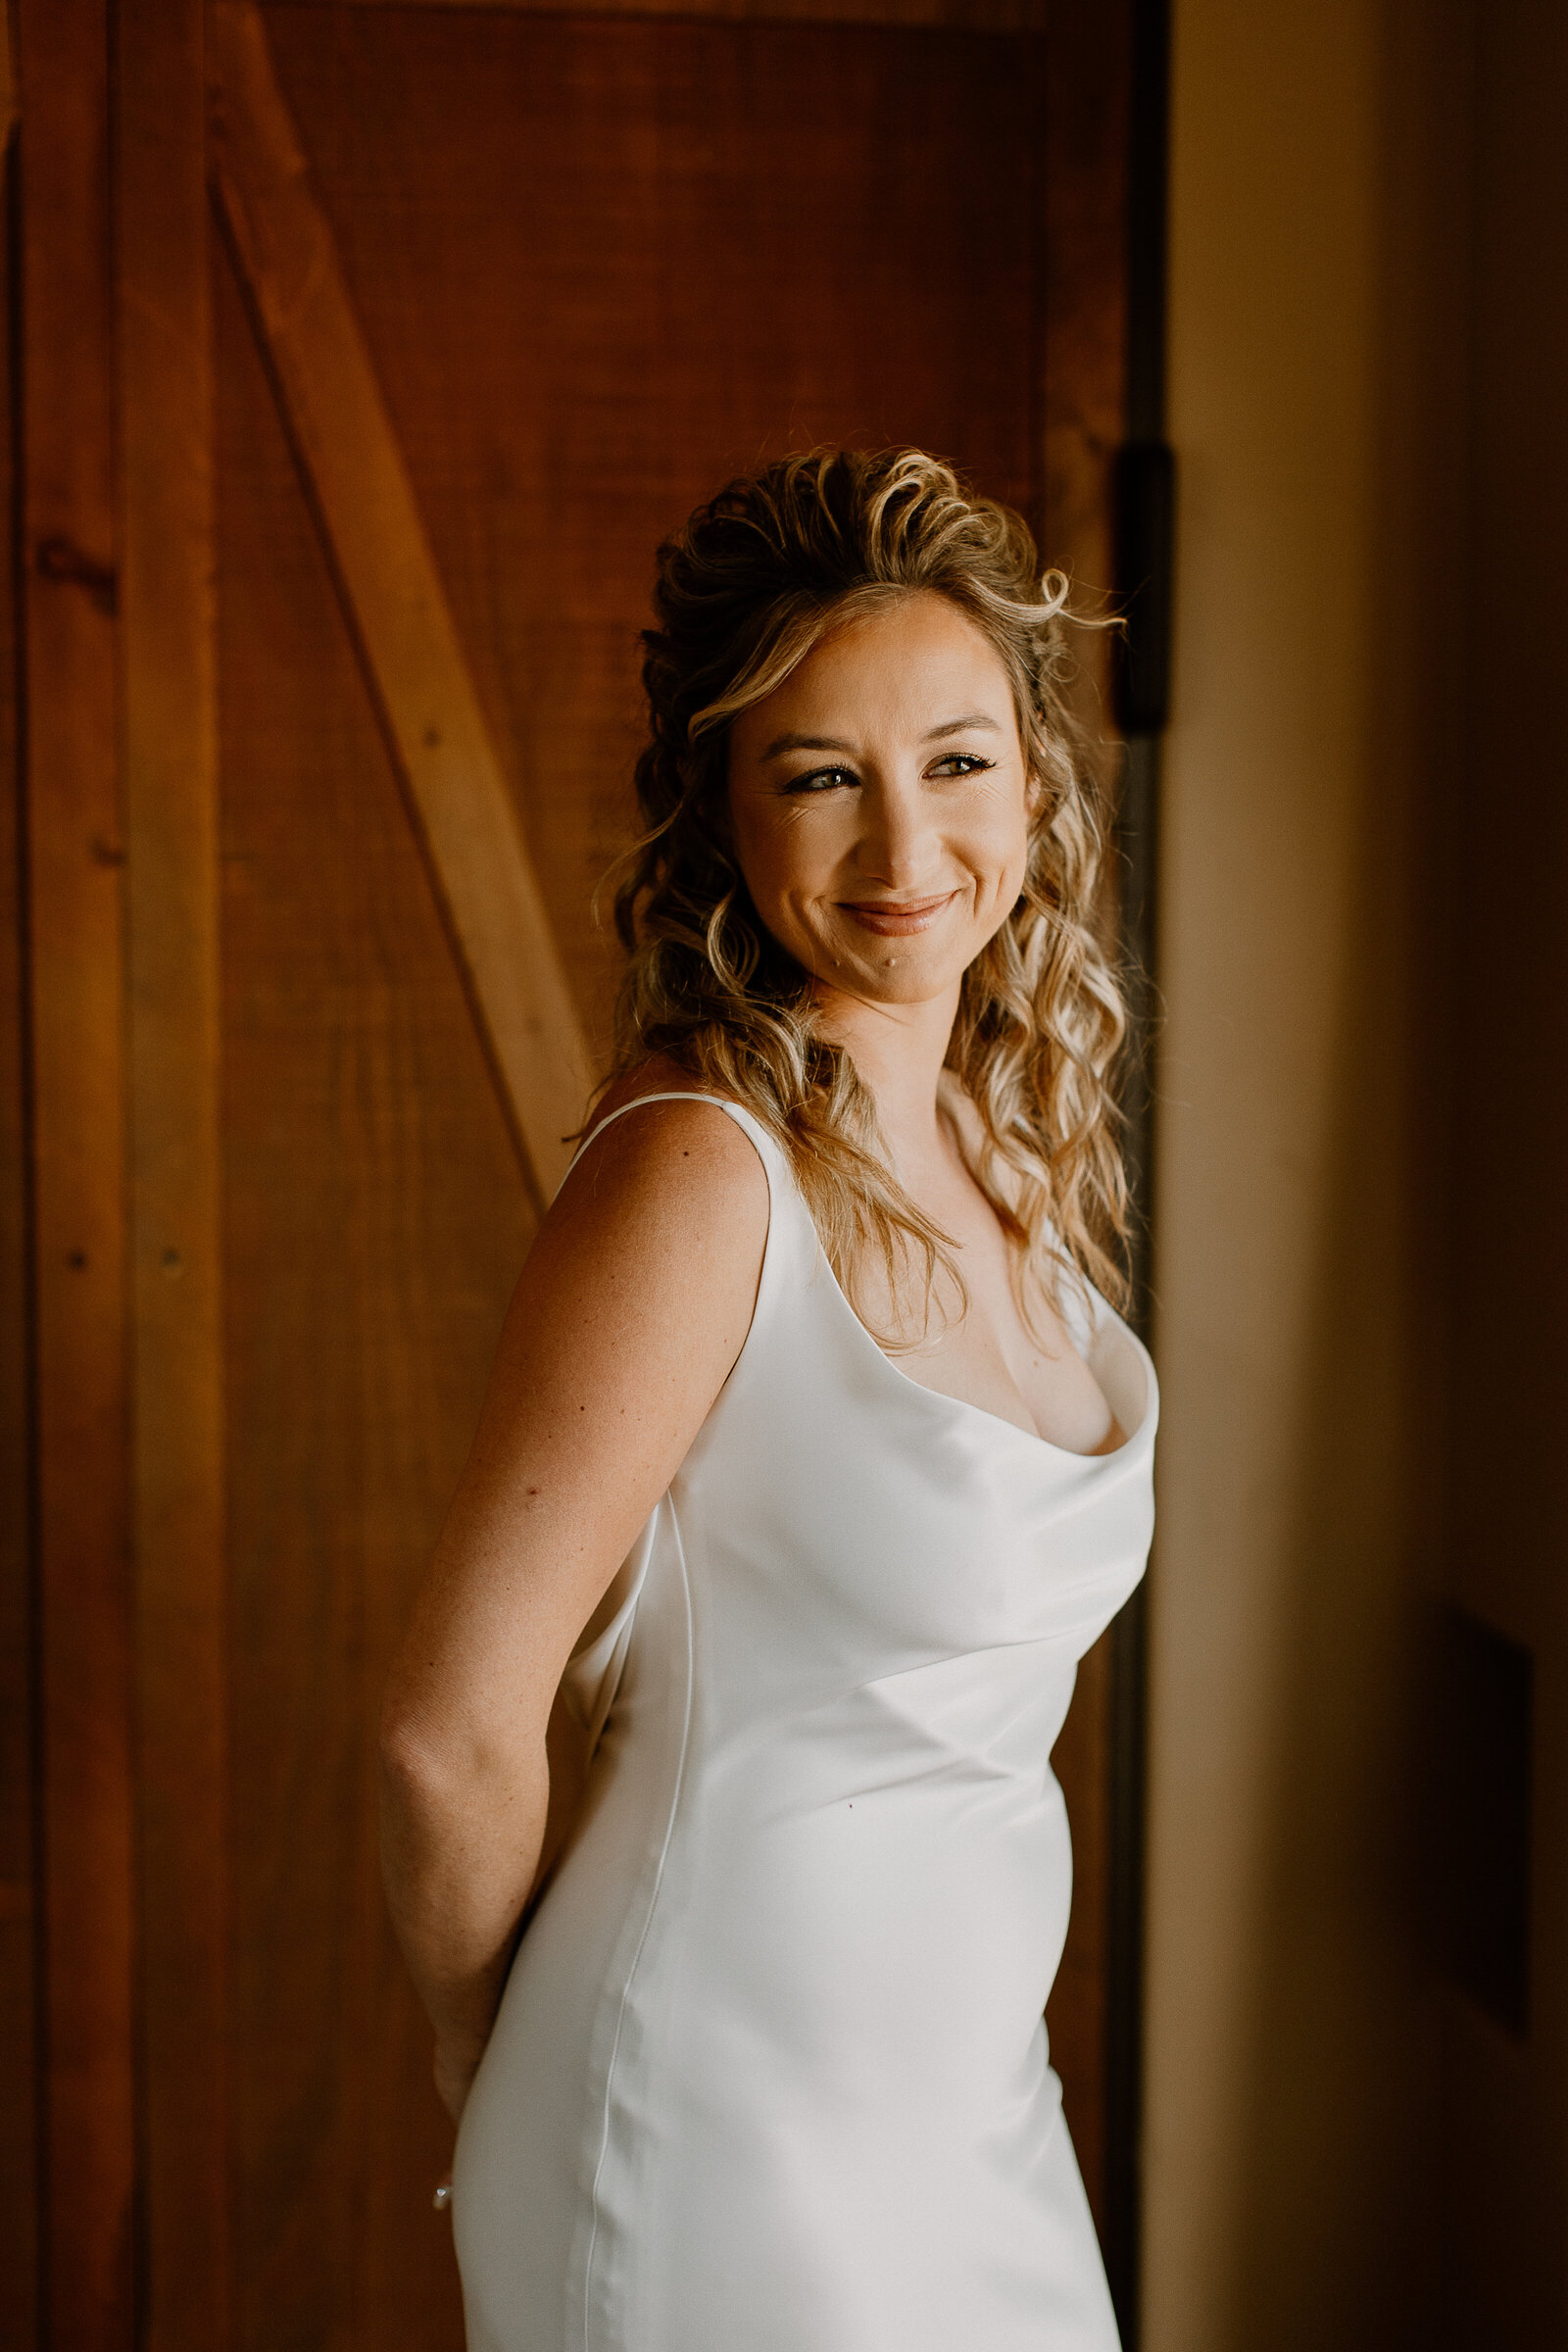 A bride smiling with her hands behind her back.